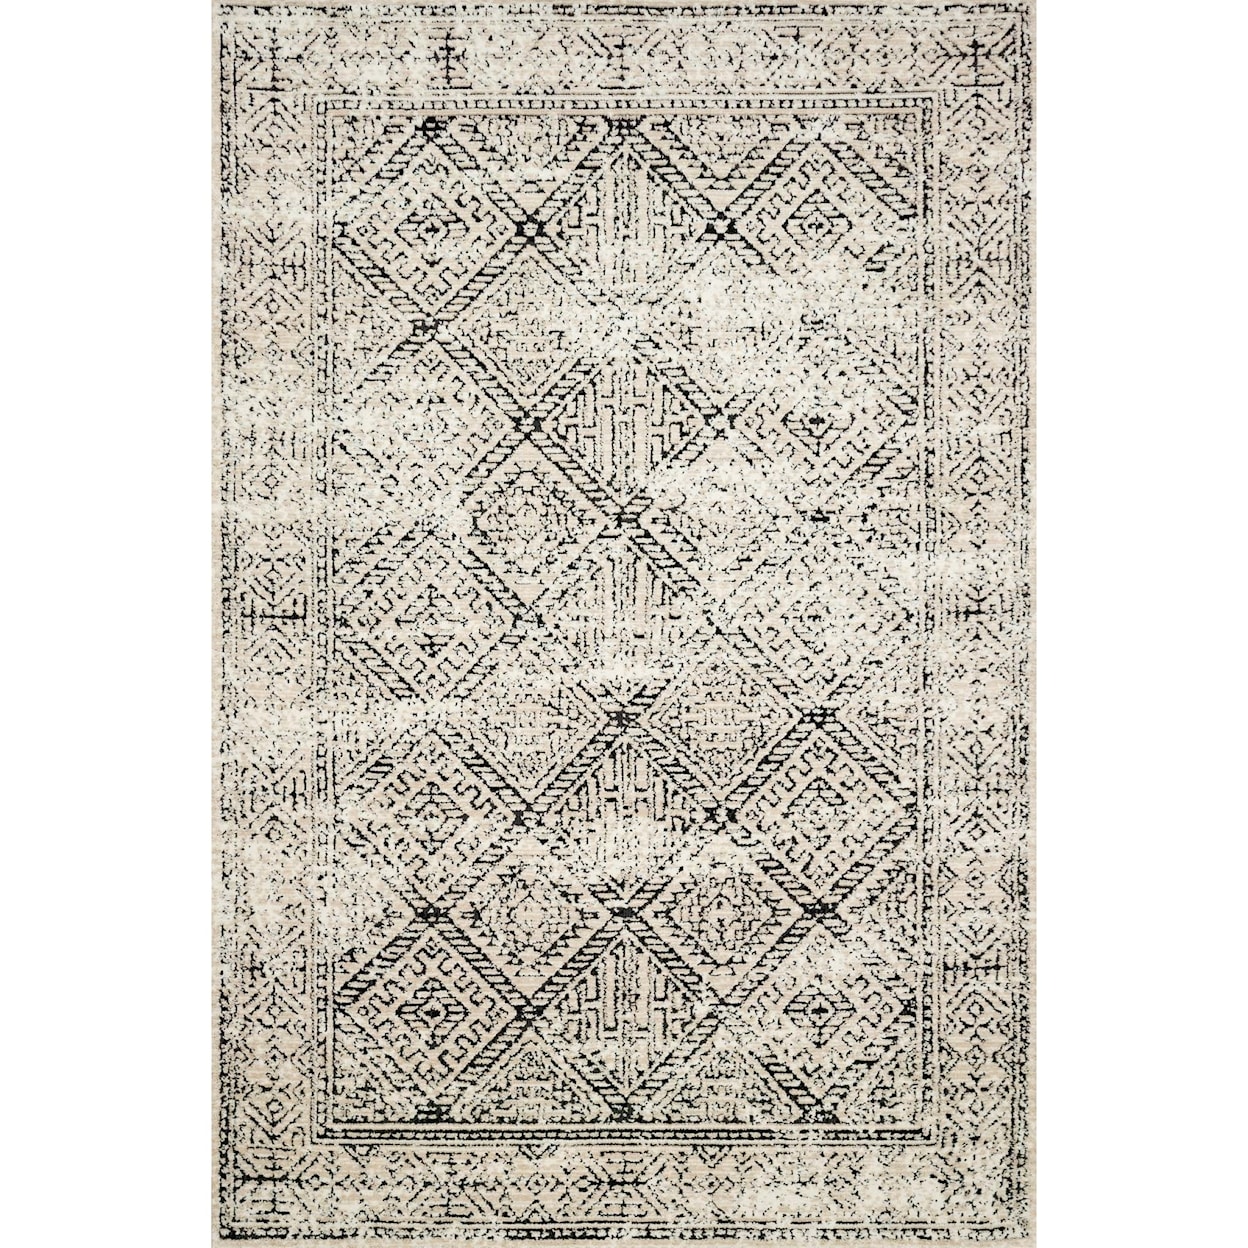 Magnolia Home by Joanna Gaines for Loloi Lotus 1'-6" x 1'-6" Square Rug